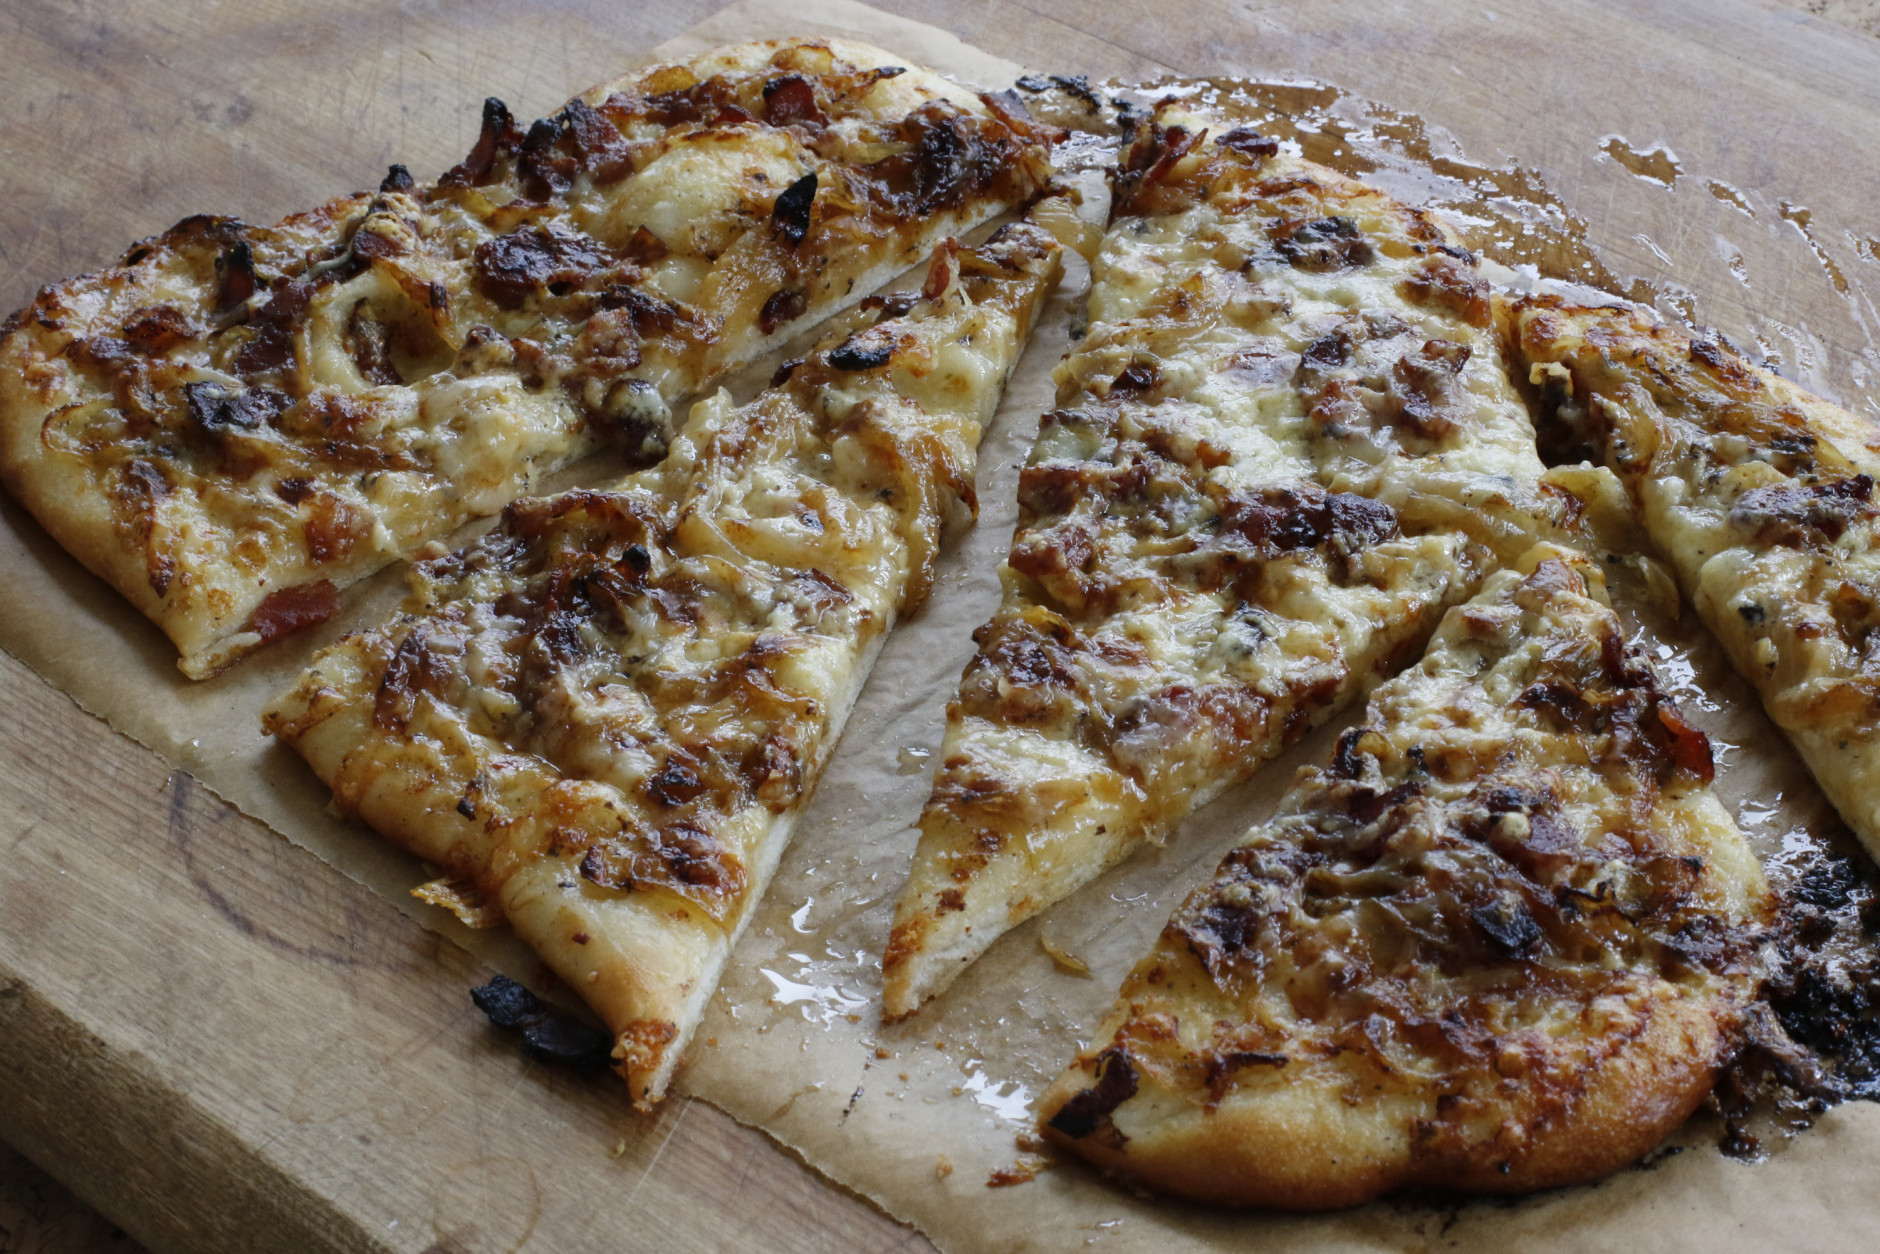 This March 2, 2016 photo shows Alsatian onion pie in Concord, N.H. This simple pizza-like dish gets a tremendous amount of flavor from onions, which are cooked slowly in a small amount of bacon fat. (AP Photo/J.M. Hirsch)